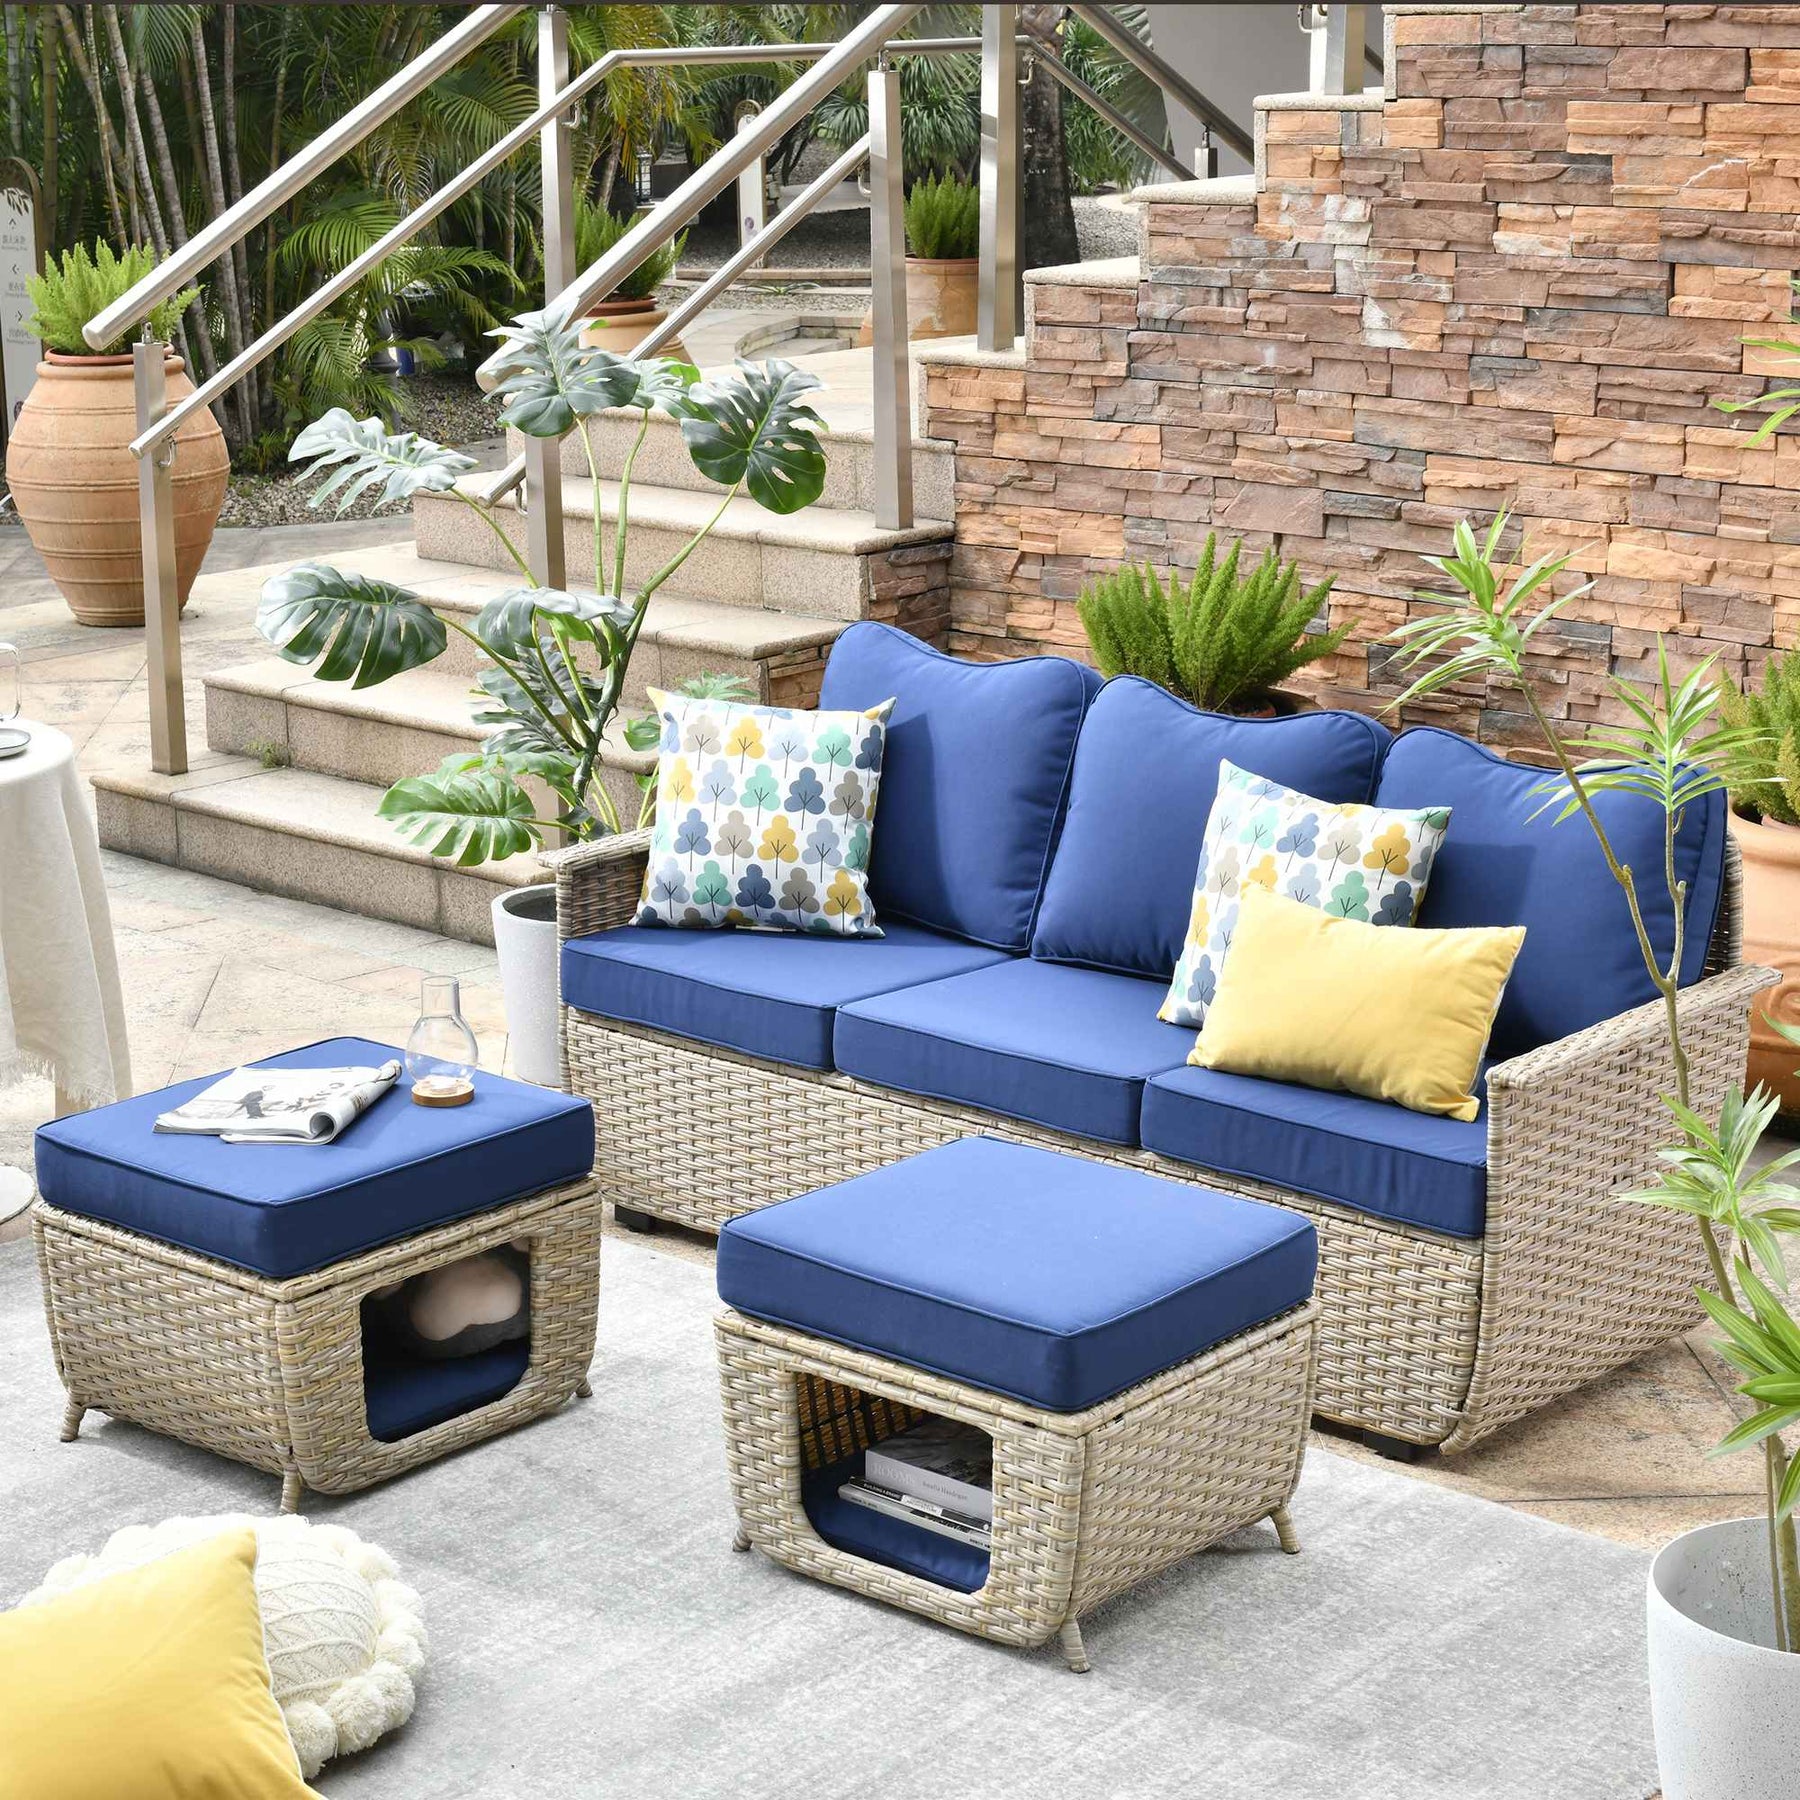 Ovios Outdoor Sofa Set 3 Pieces Beige Wicker Couch with Multifunctional Storage Ottomans